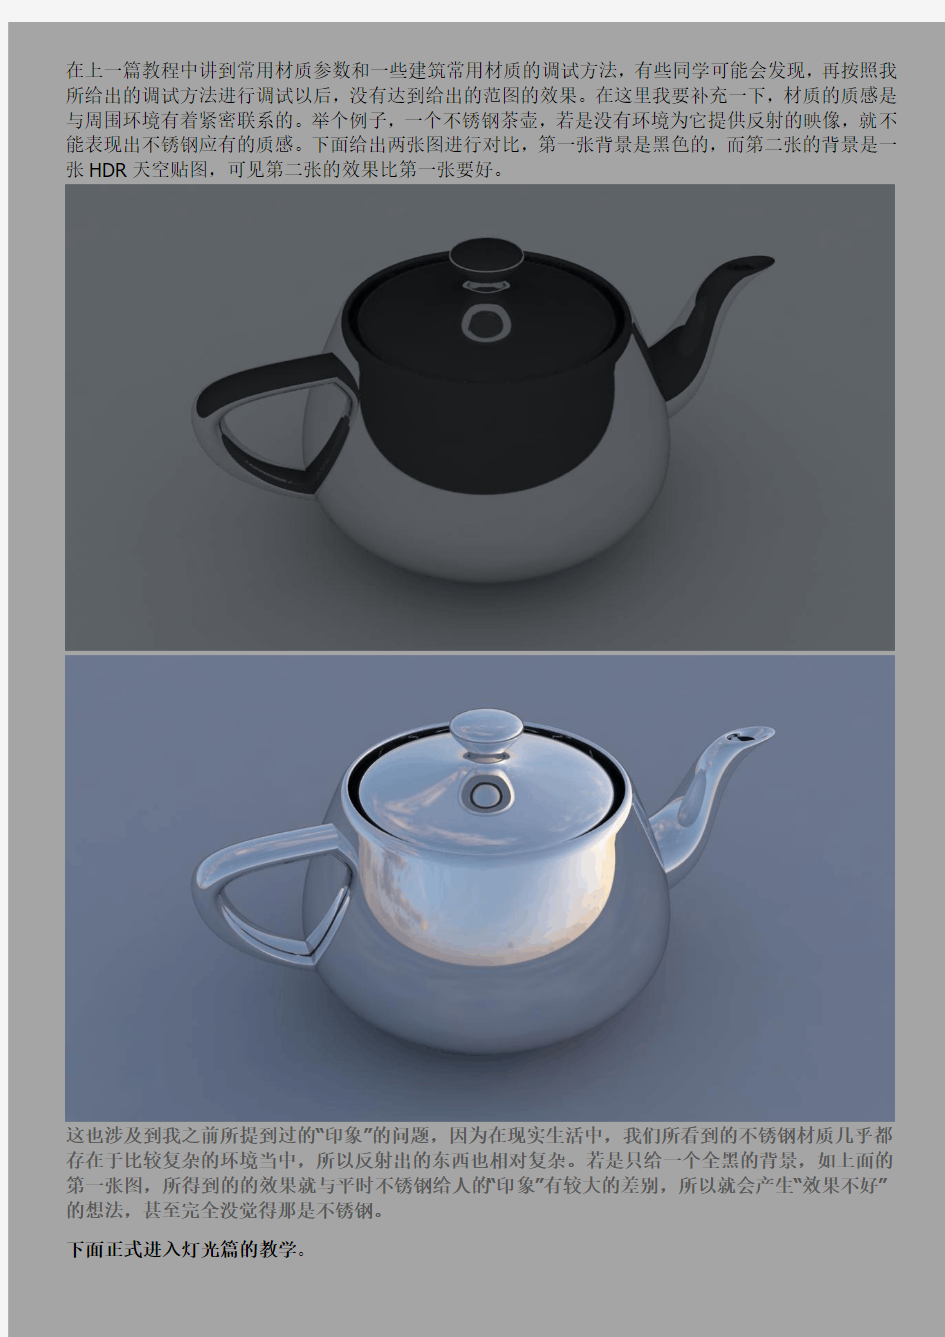 vray for sketchup渲染教程③——灯光篇